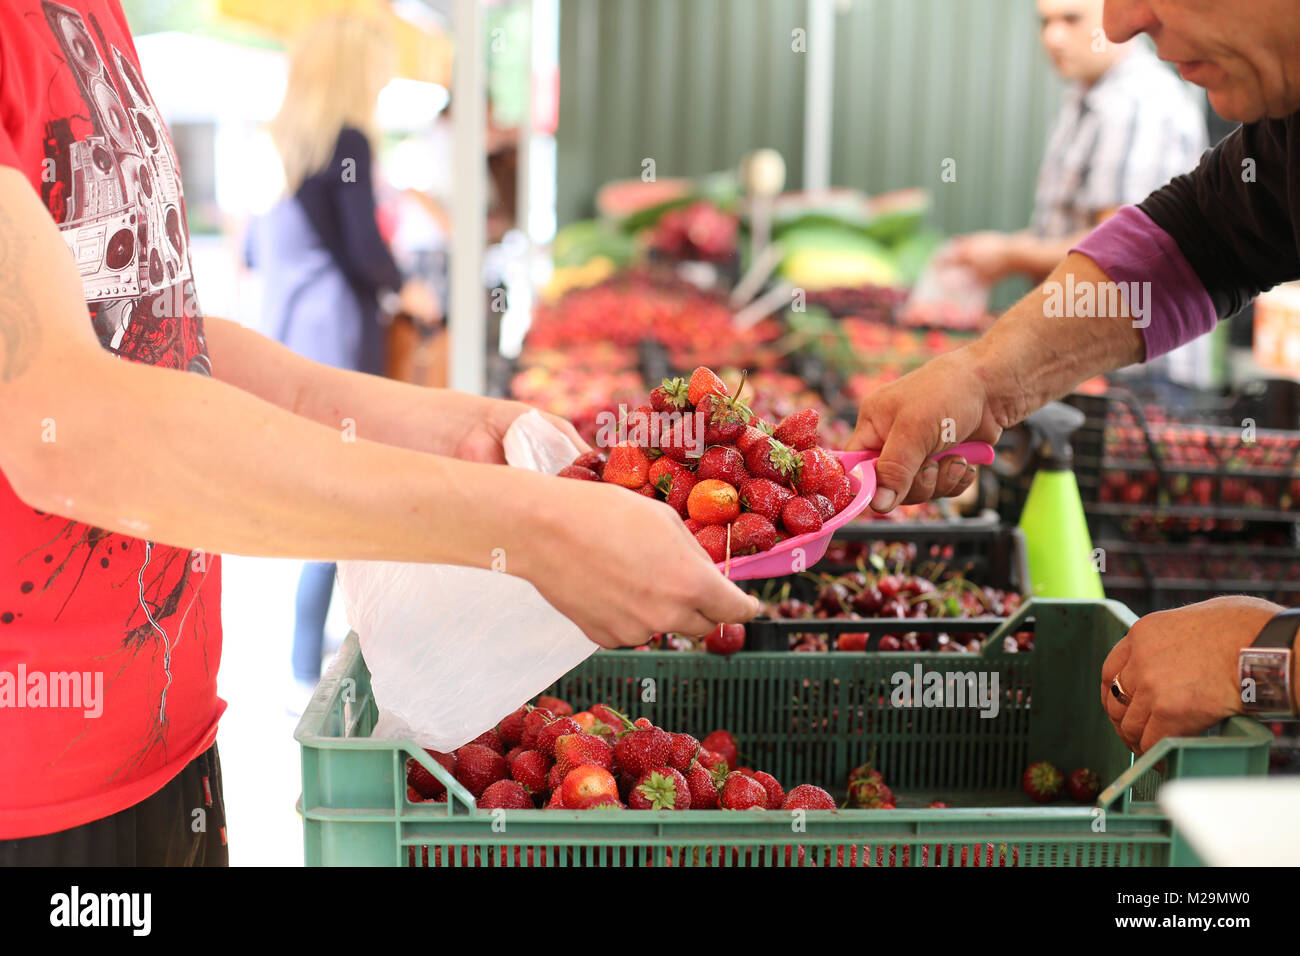 Local Farmers Market. Fresh produce: vegetables, berries, wild flowers. Older people buying groceries. Scales, crates, boxes. Vilnius, Lithuania. Stock Photo